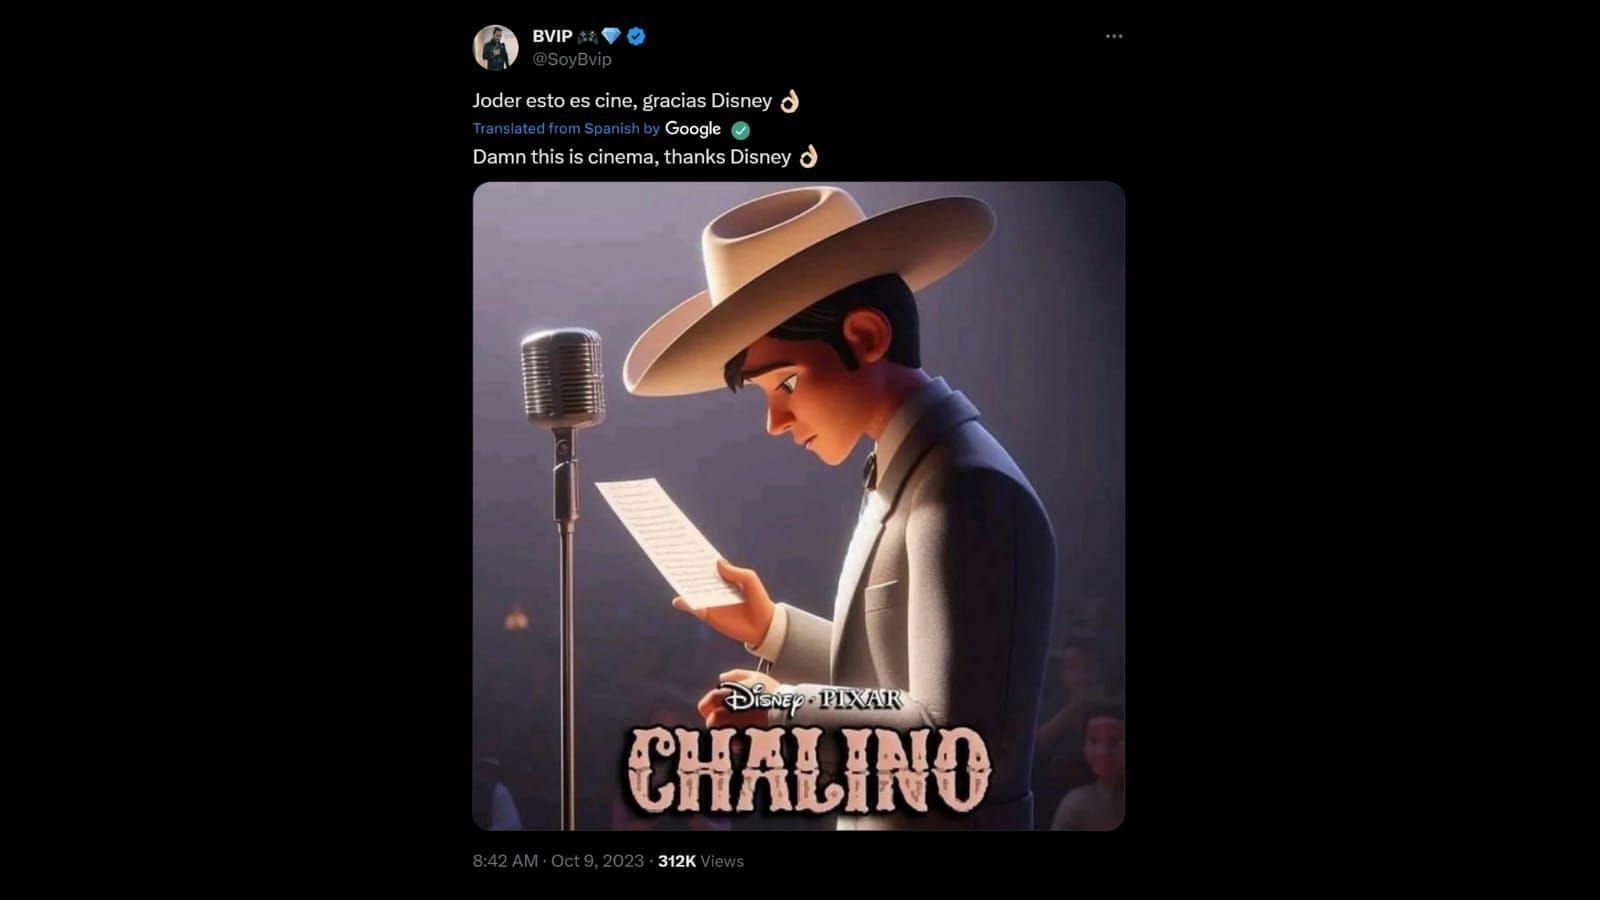 Chalino movie poster goes viral online (Image via X/@SoyBvip)